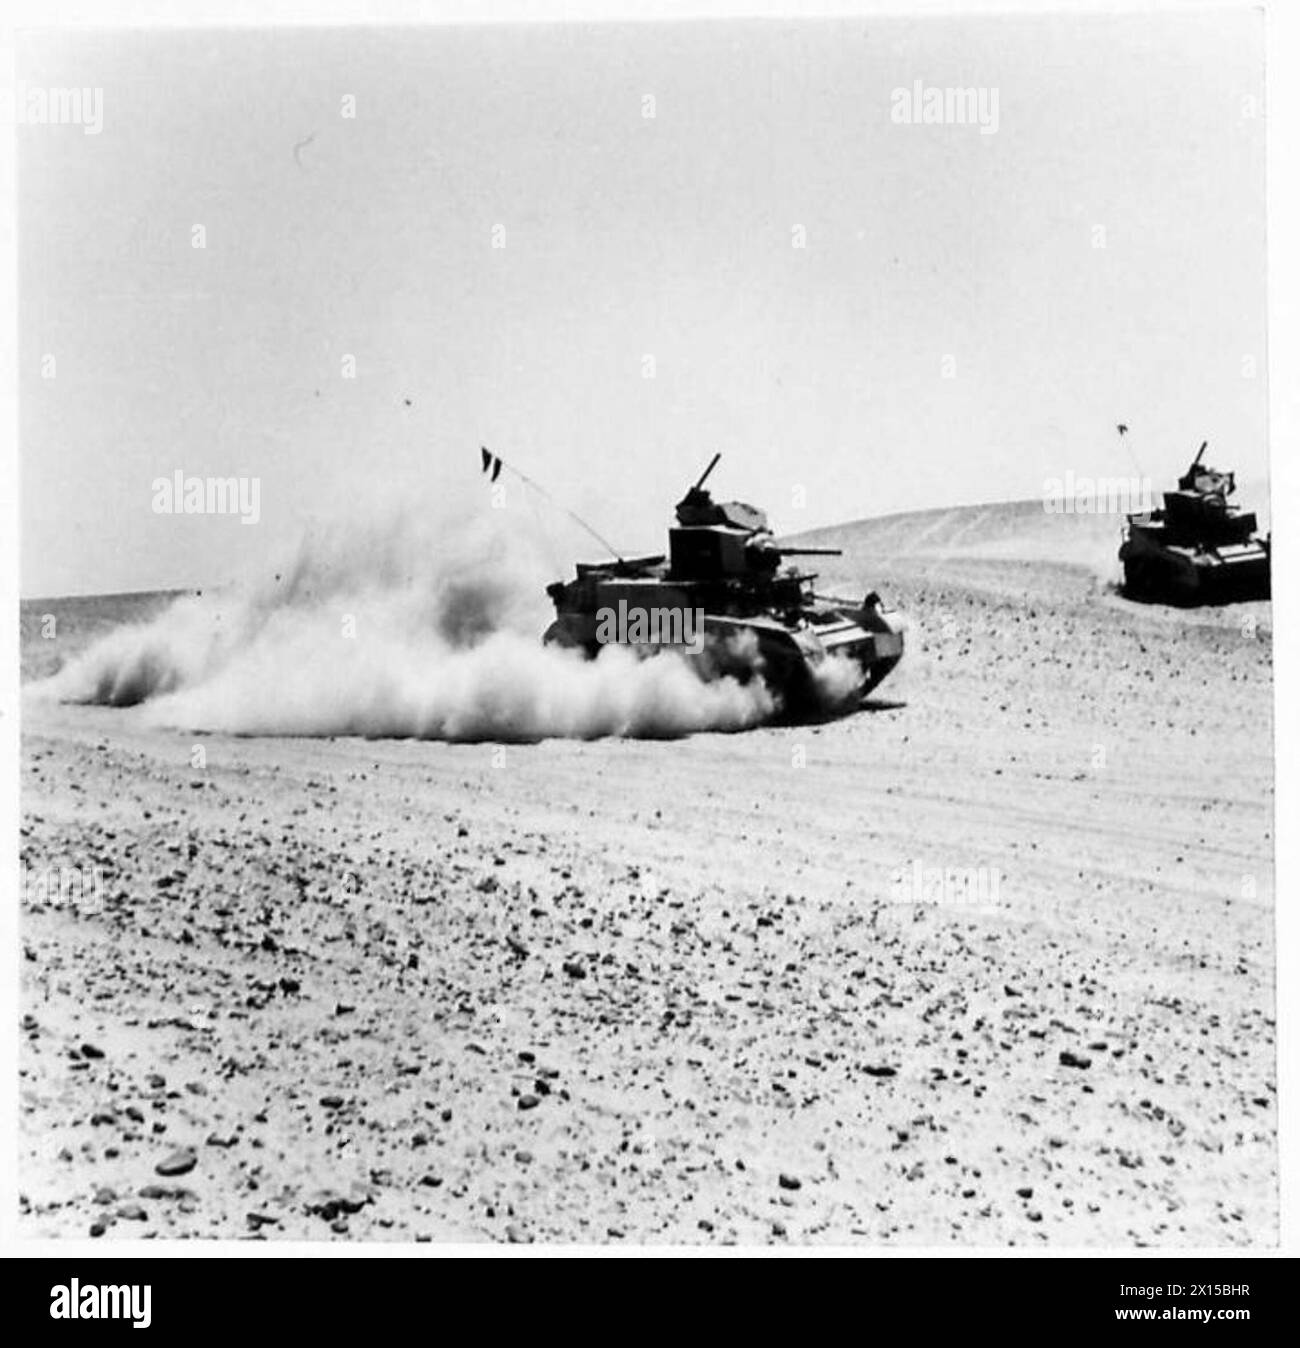 A FAMOUS CAVALRY REGIMENT TRY OUT THEIR NEW AMERICAN TANKS - Kicking up the durst in the desert! The drivers of the new American tanks were quickly at the controls and were seen streaking across the desert, putting the tanks under severe tests British Army Stock Photo